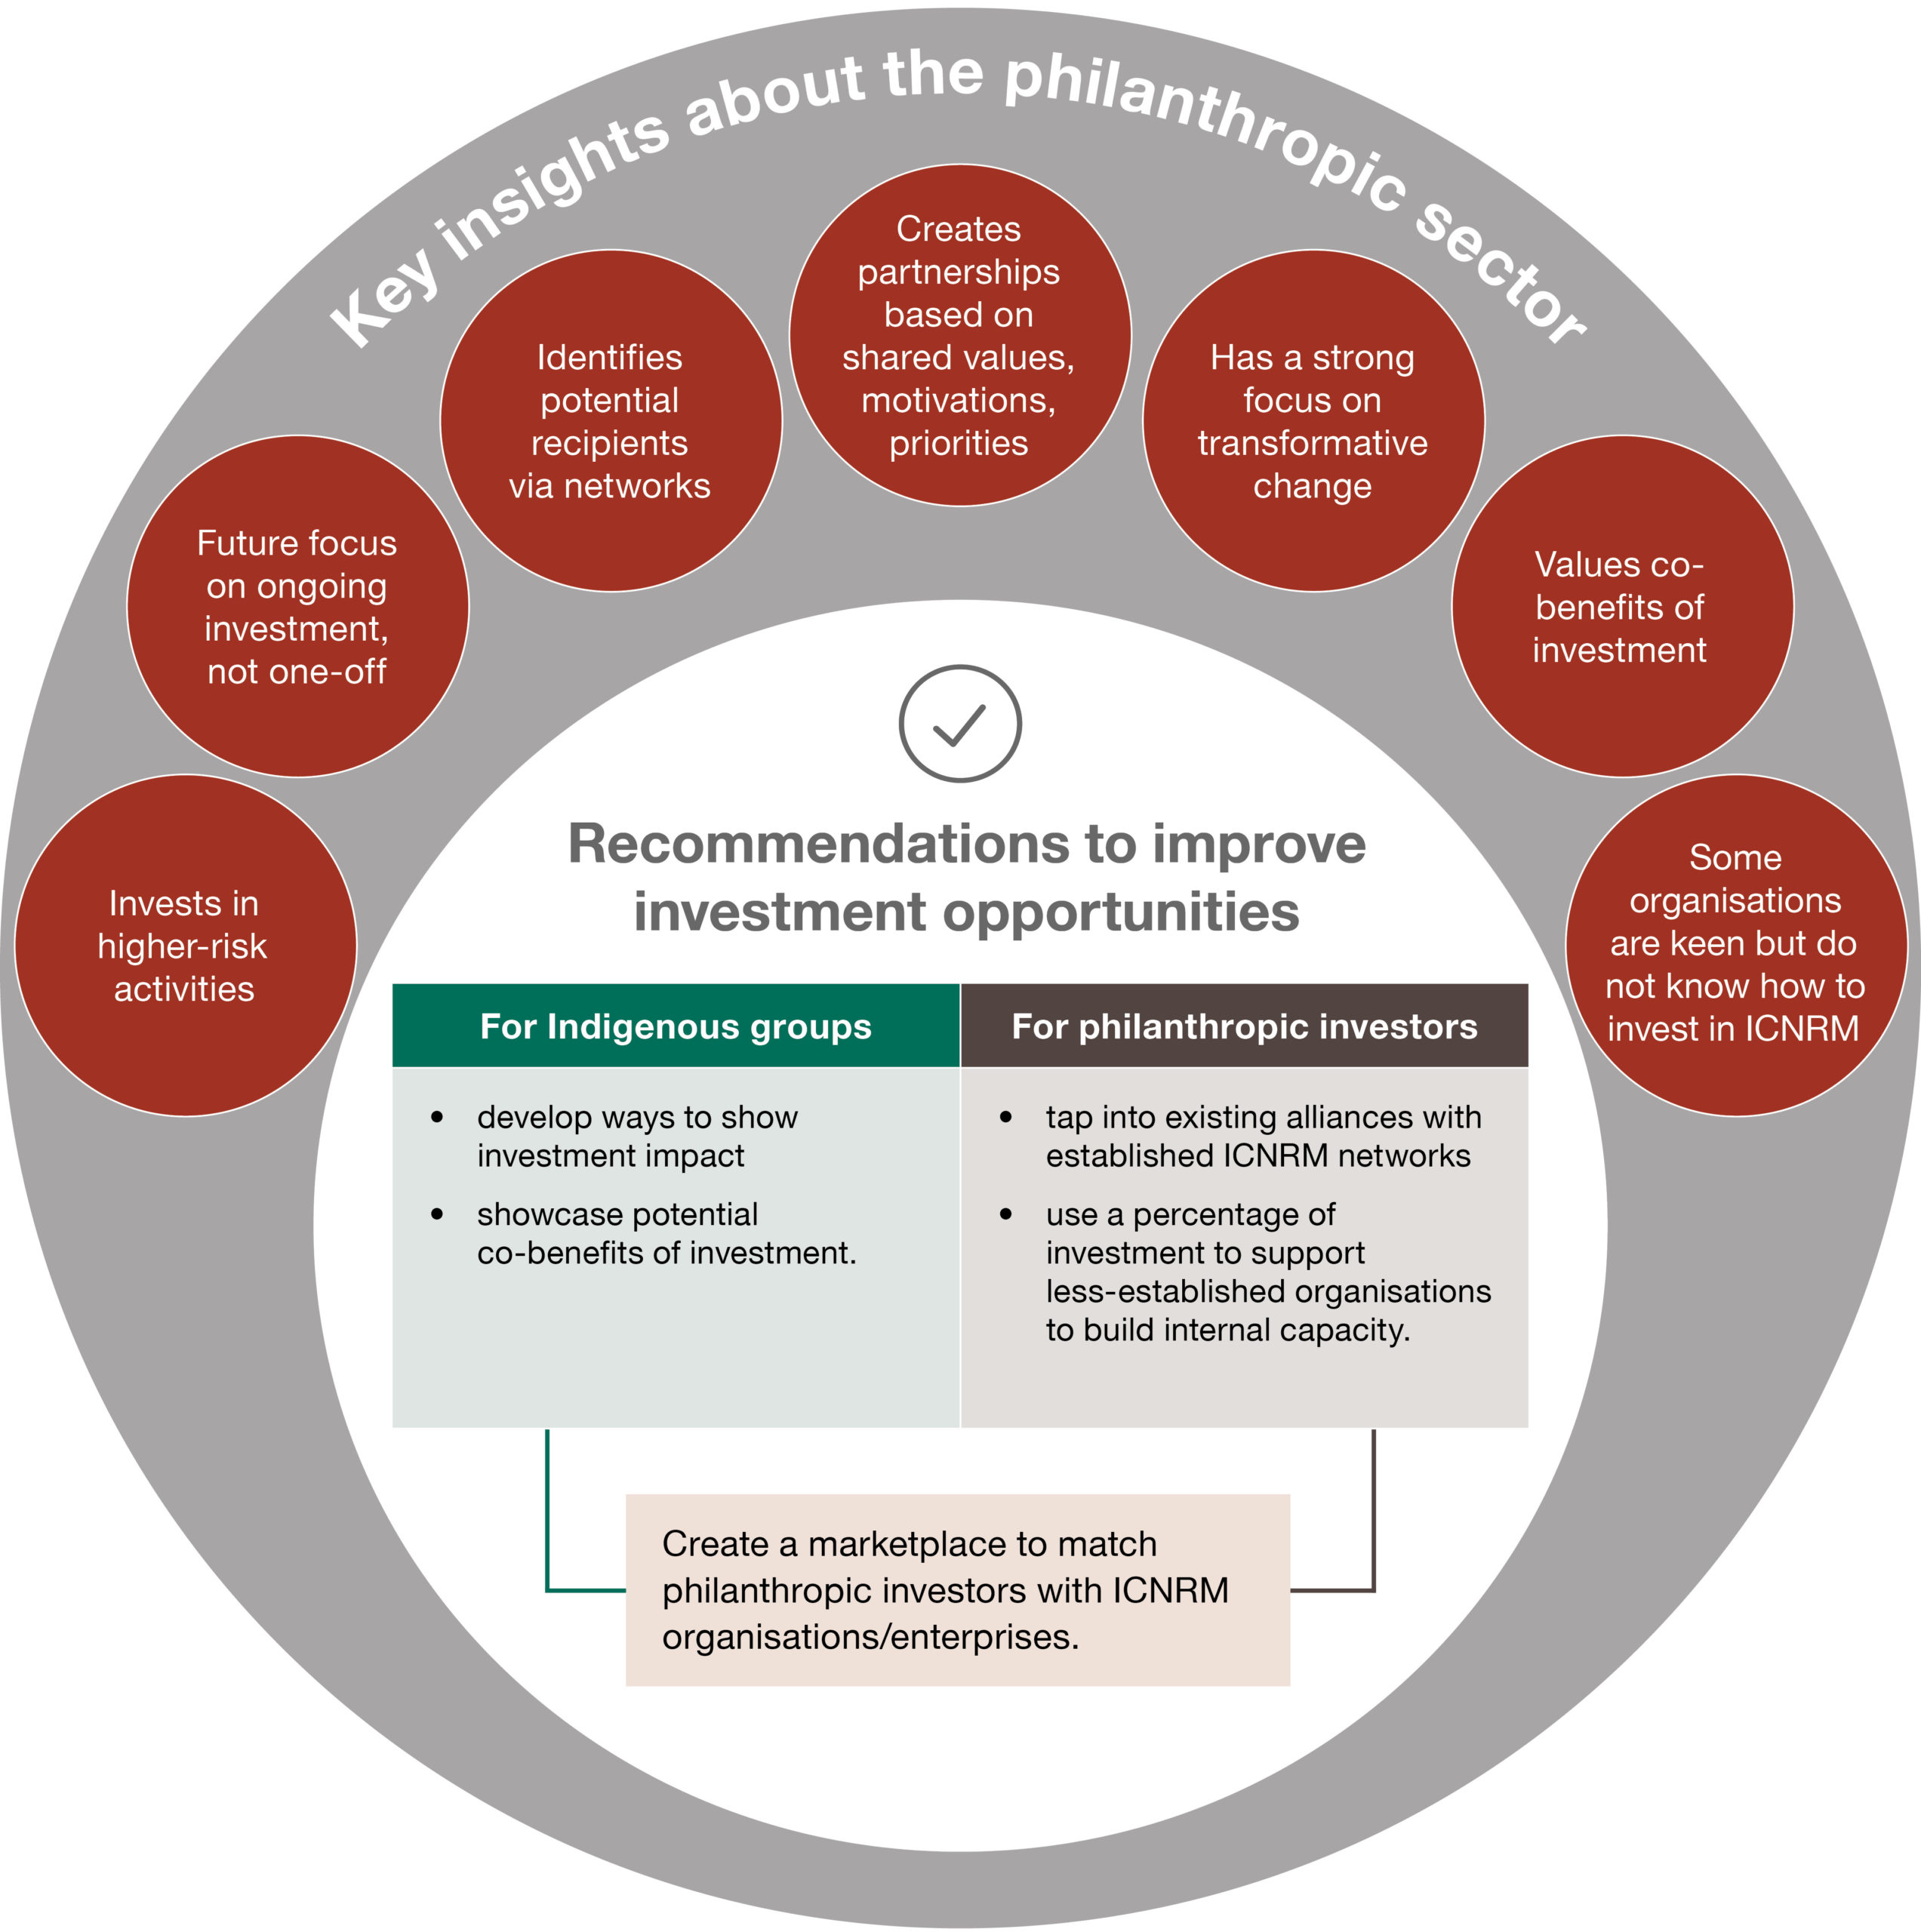 Figure: Key insights and recommendations to increase investment opportunities between the ICNRM and philanthropic sectors.